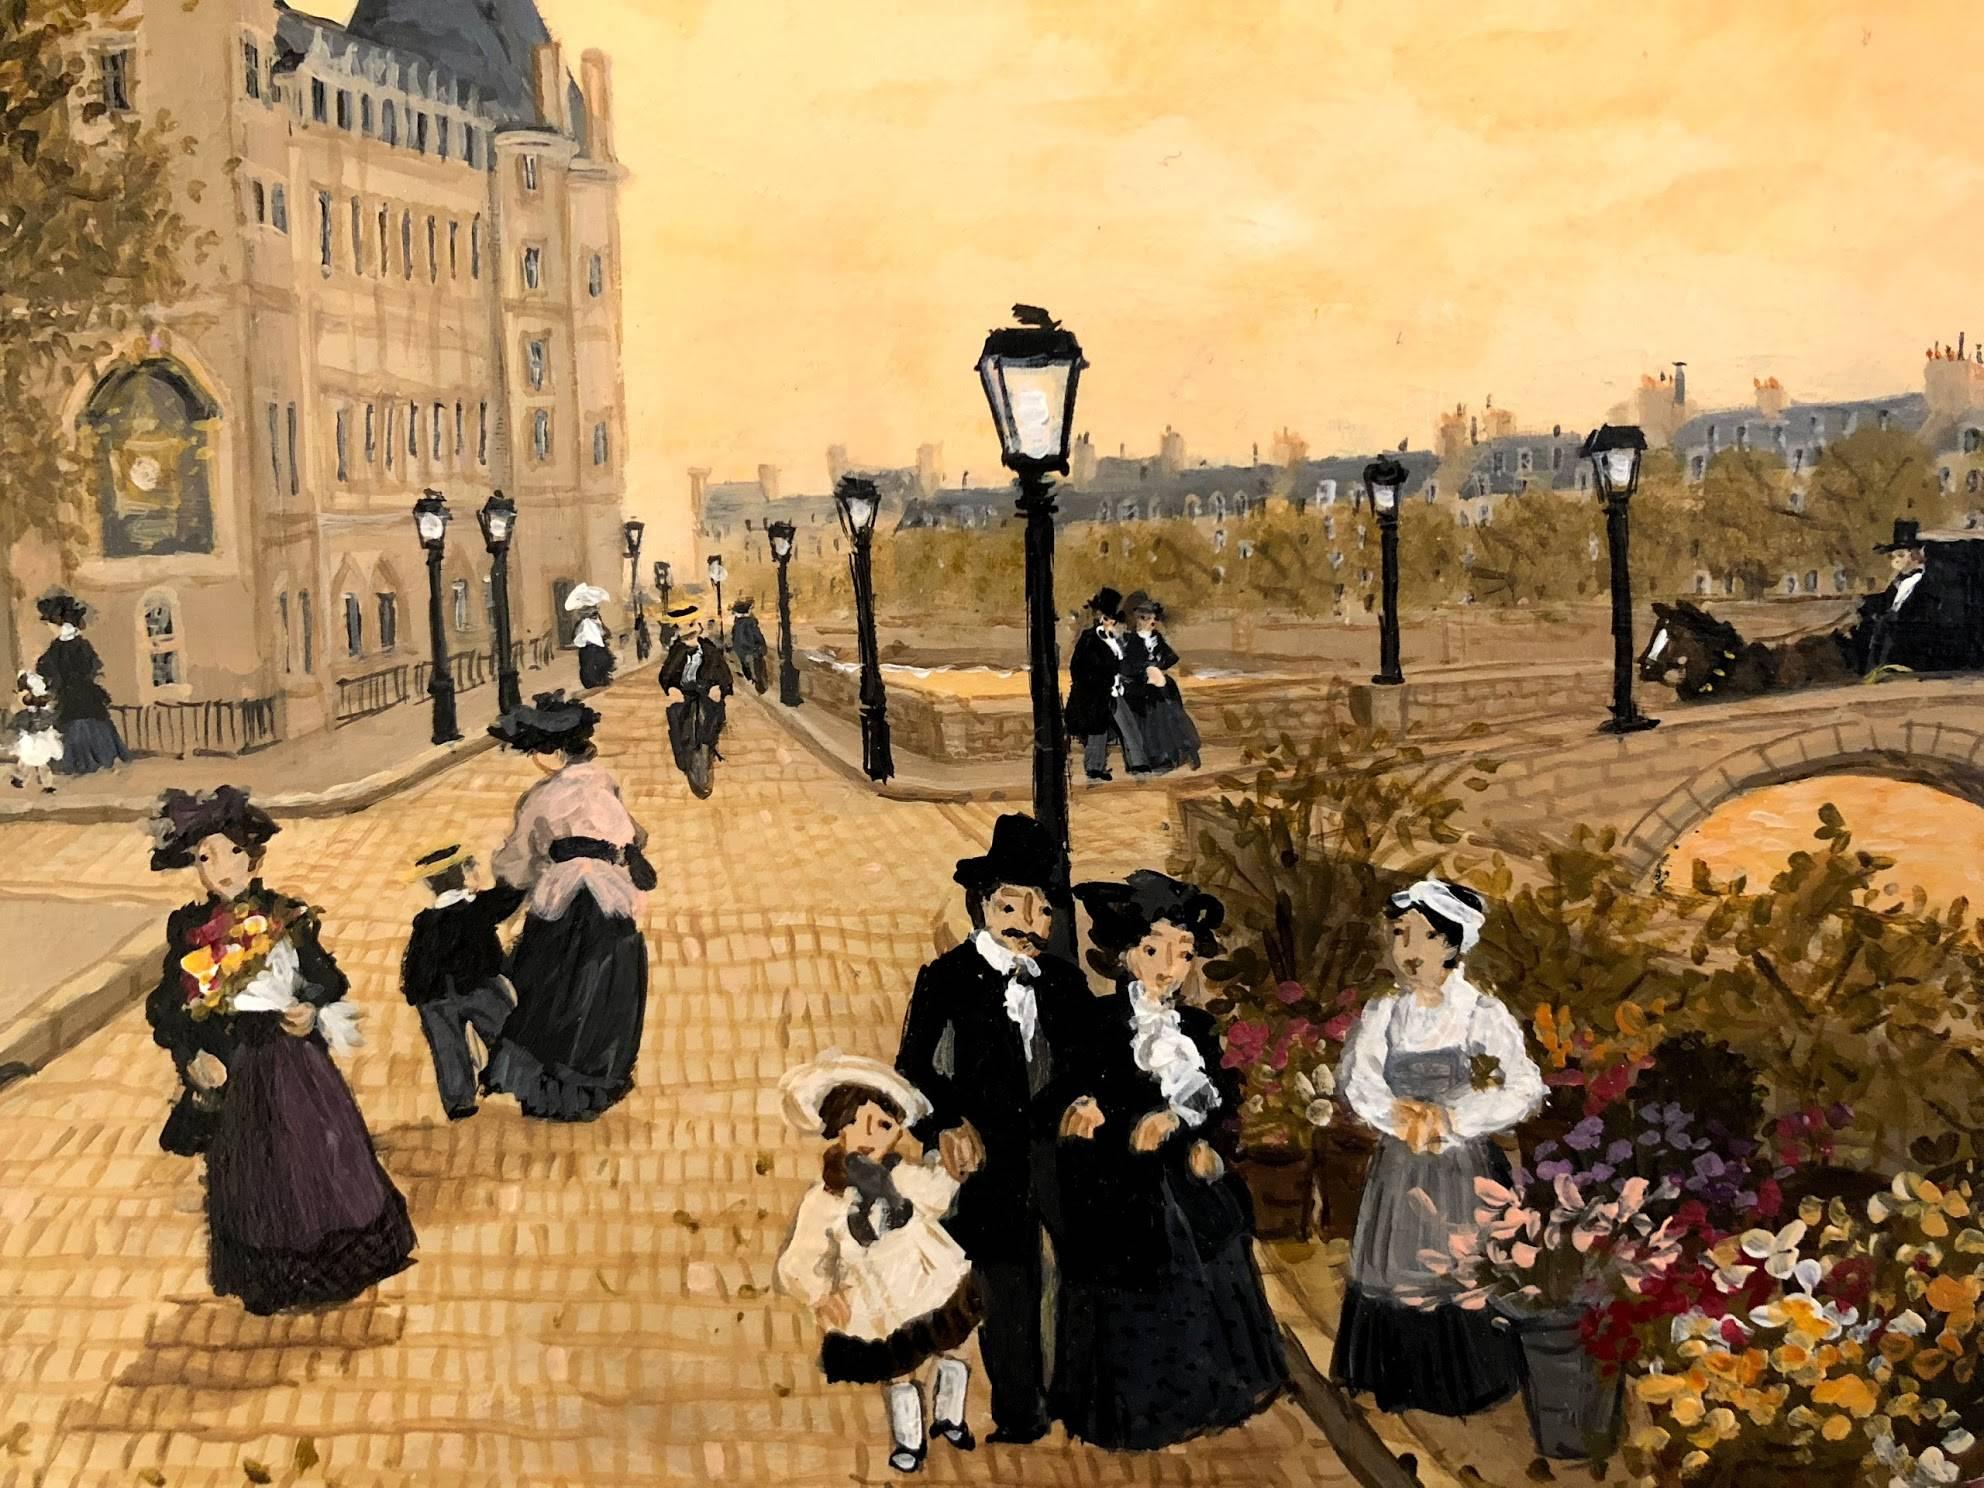 This charming acrylic painting depicts Parisian lifestyle with families and children walking along the Seine under street lamps. Using warm tones of orange, the painting creates a charming and lively atmosphere.

Fabienne Delacroix is the youngest